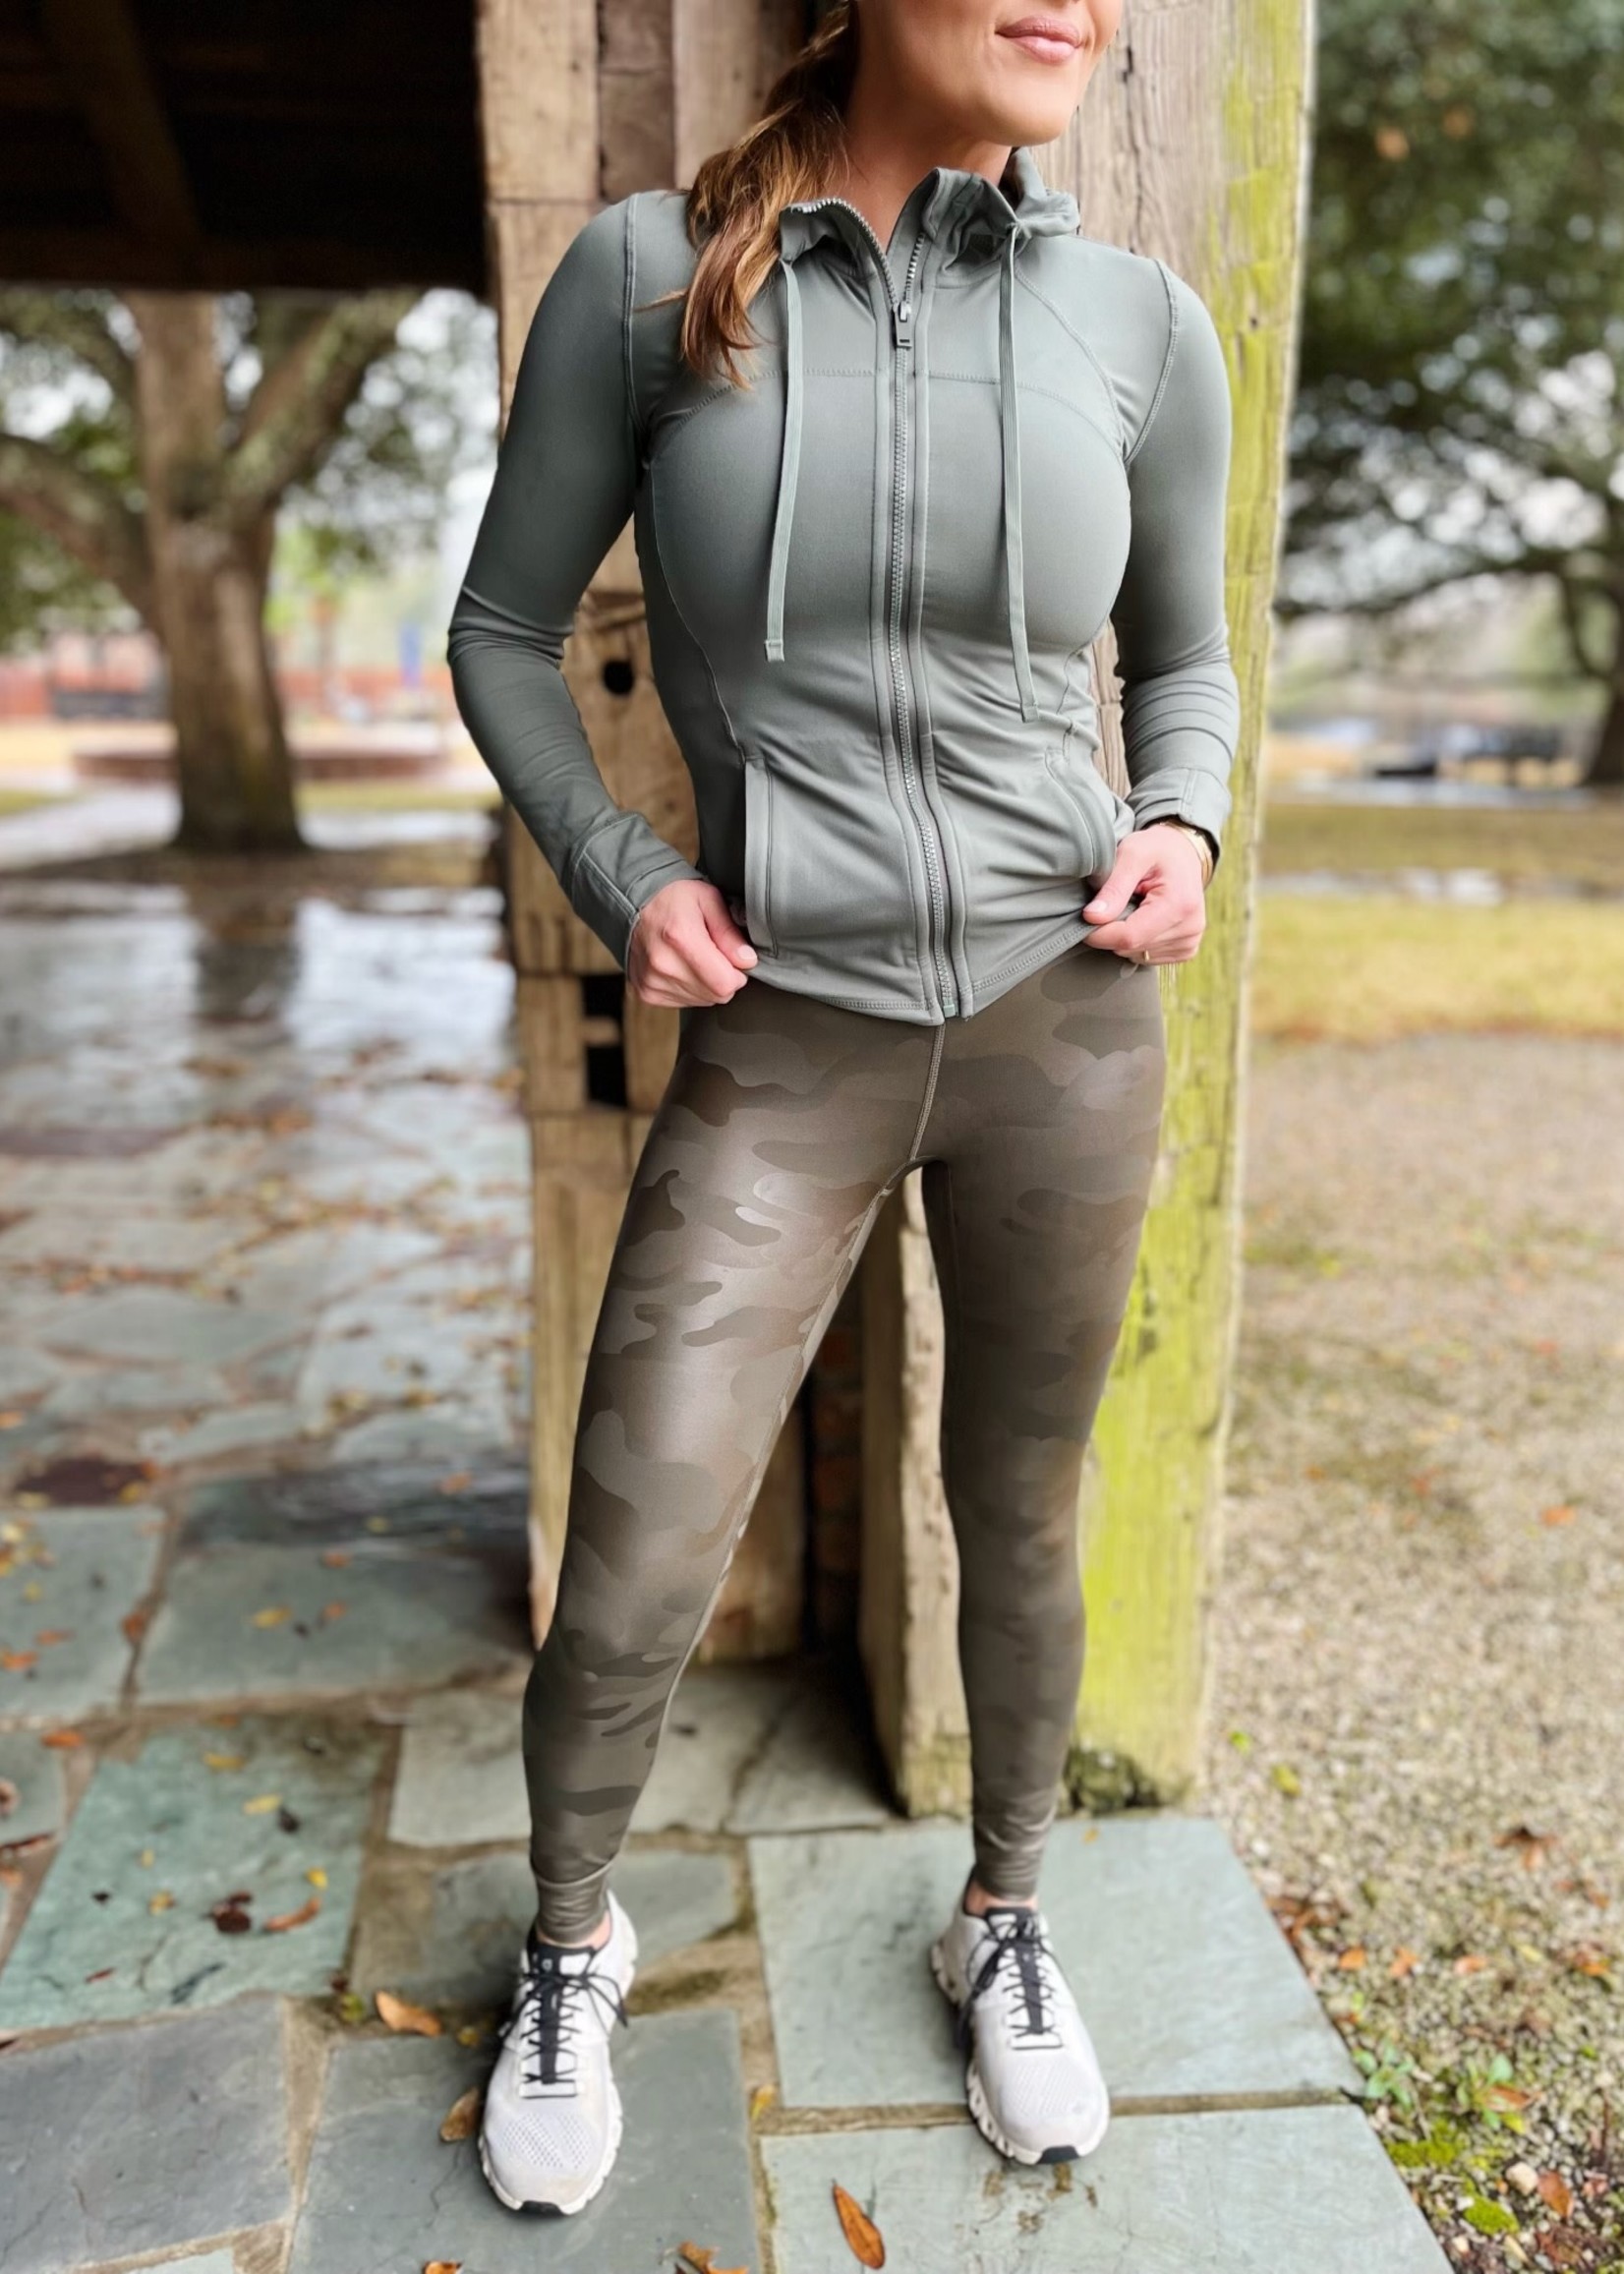 Bloom and Company Olive Camo Full Length Leggings